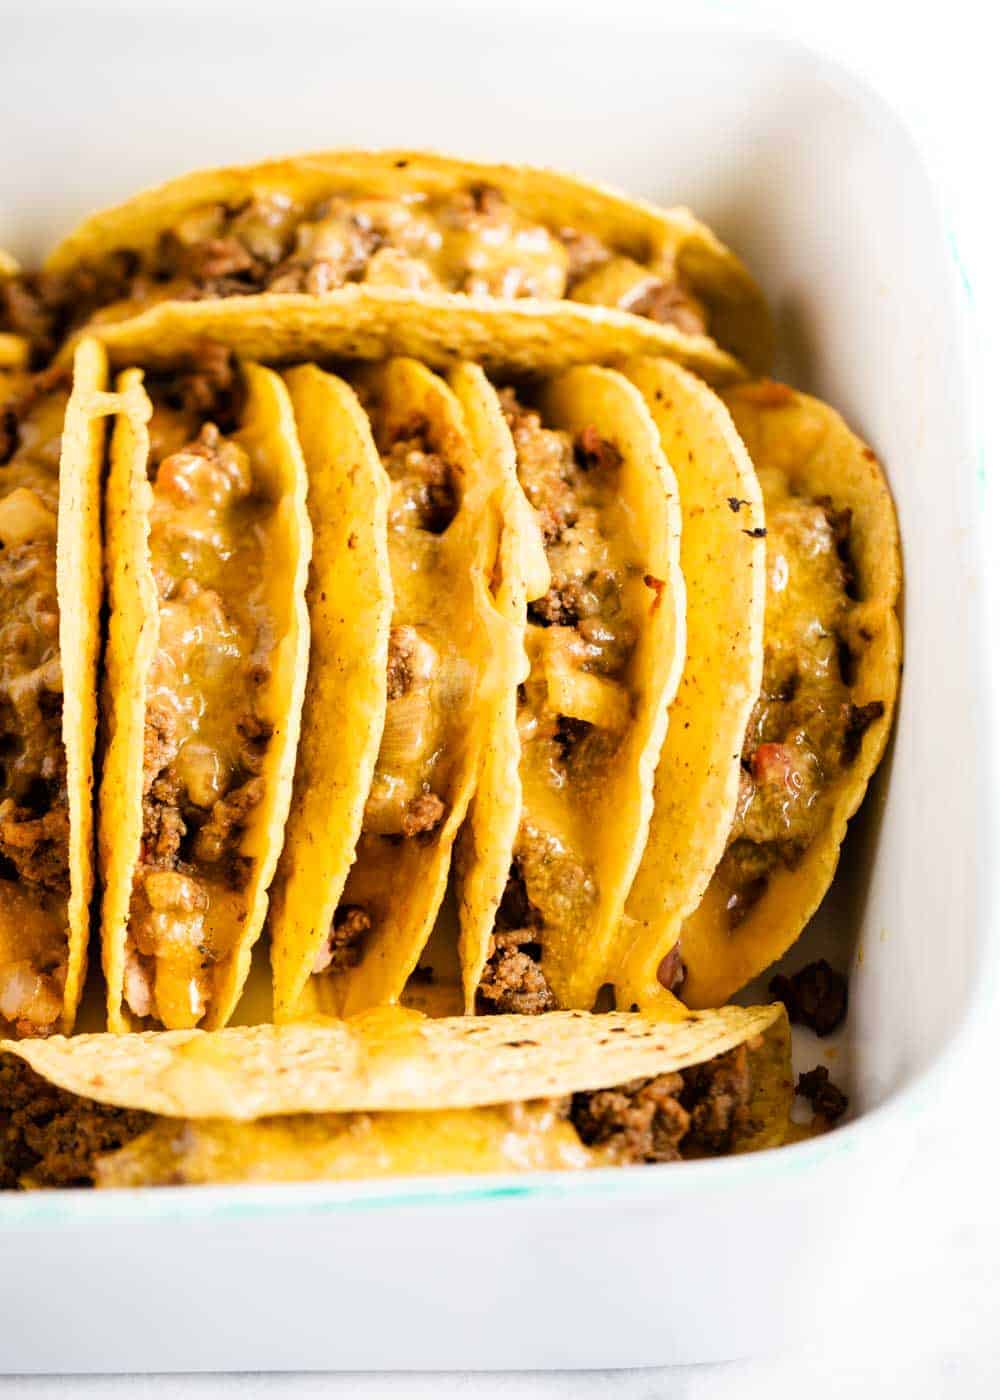 Ground beef tacos in pan with melted cheese on top.